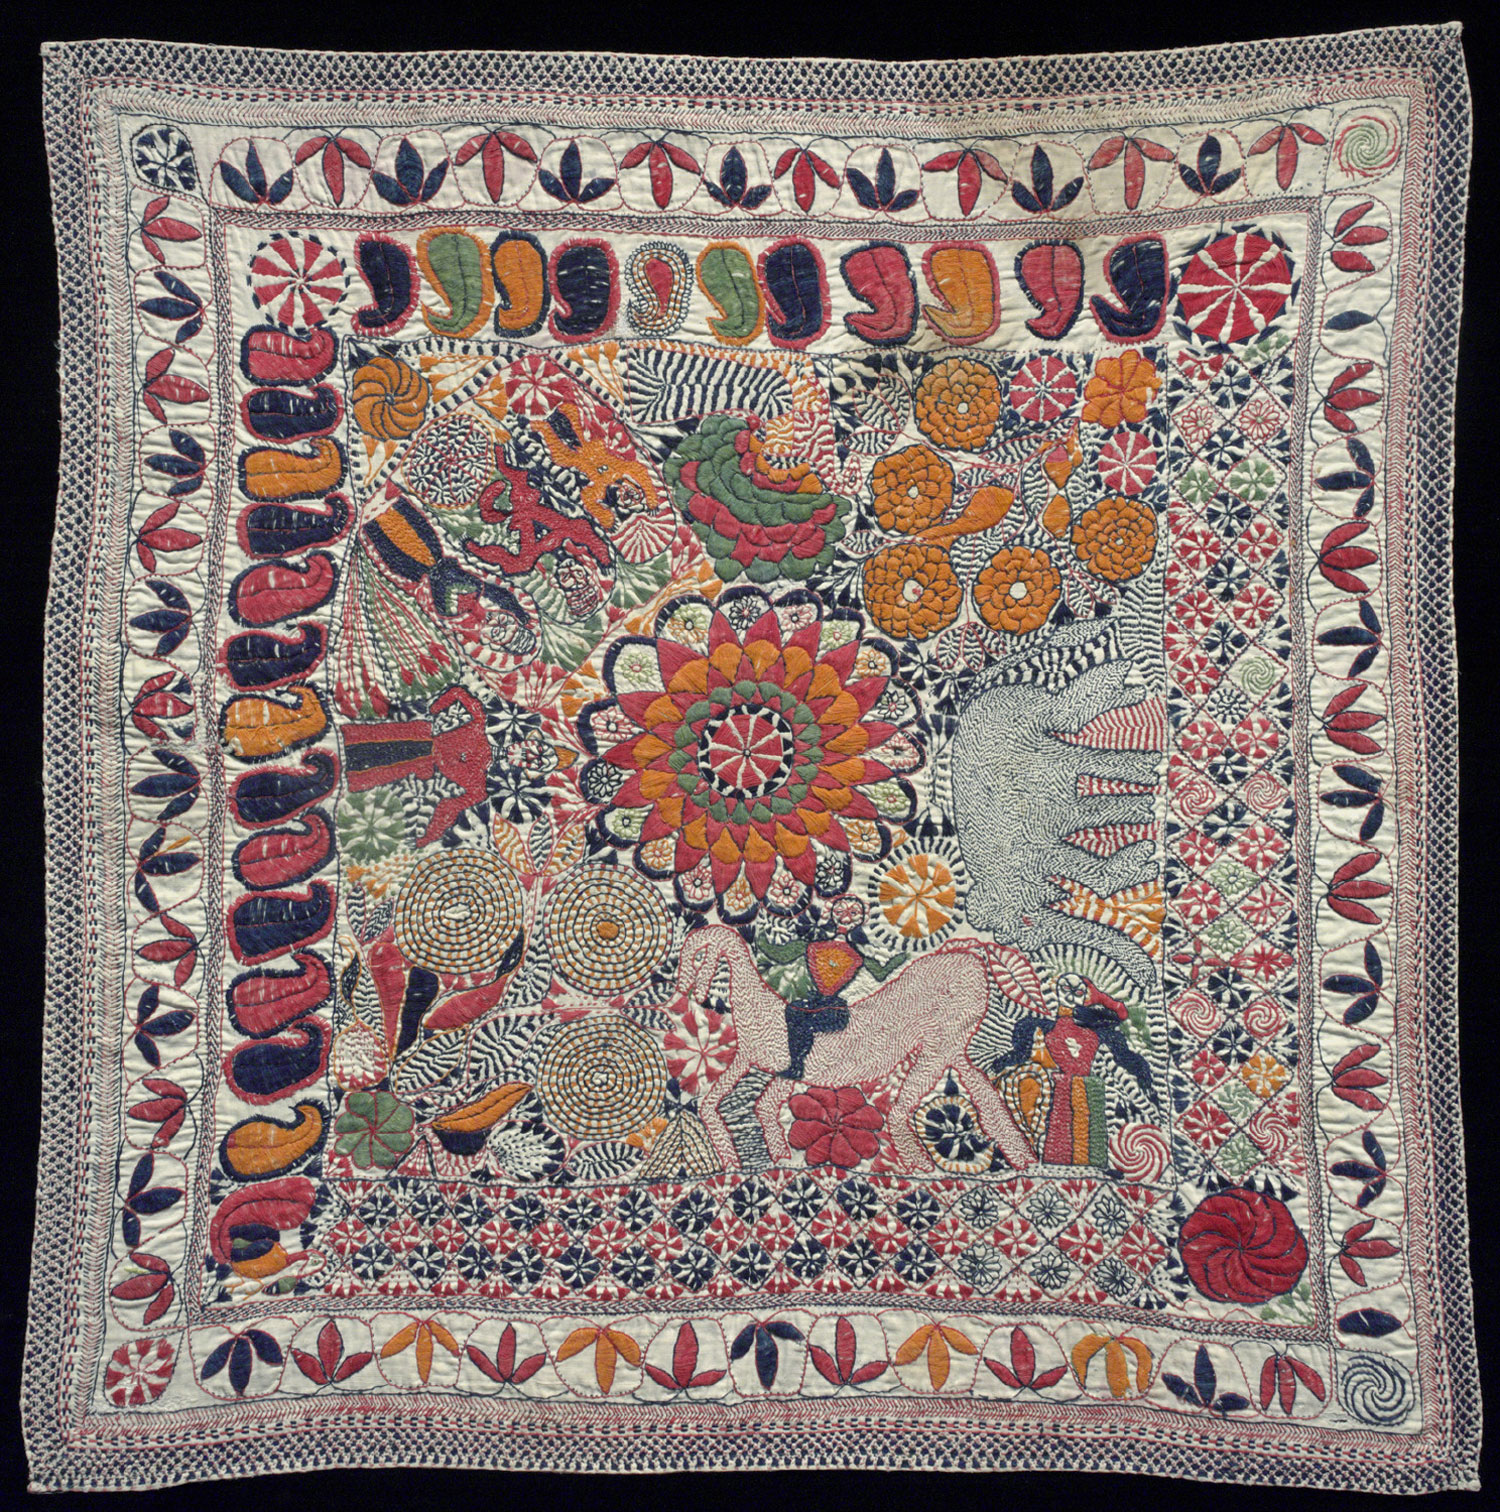 Made in Faridpur District, Bangladesh or West Bengal, India; Second half of 19th century. Photo by Philadelphia Museum of Art